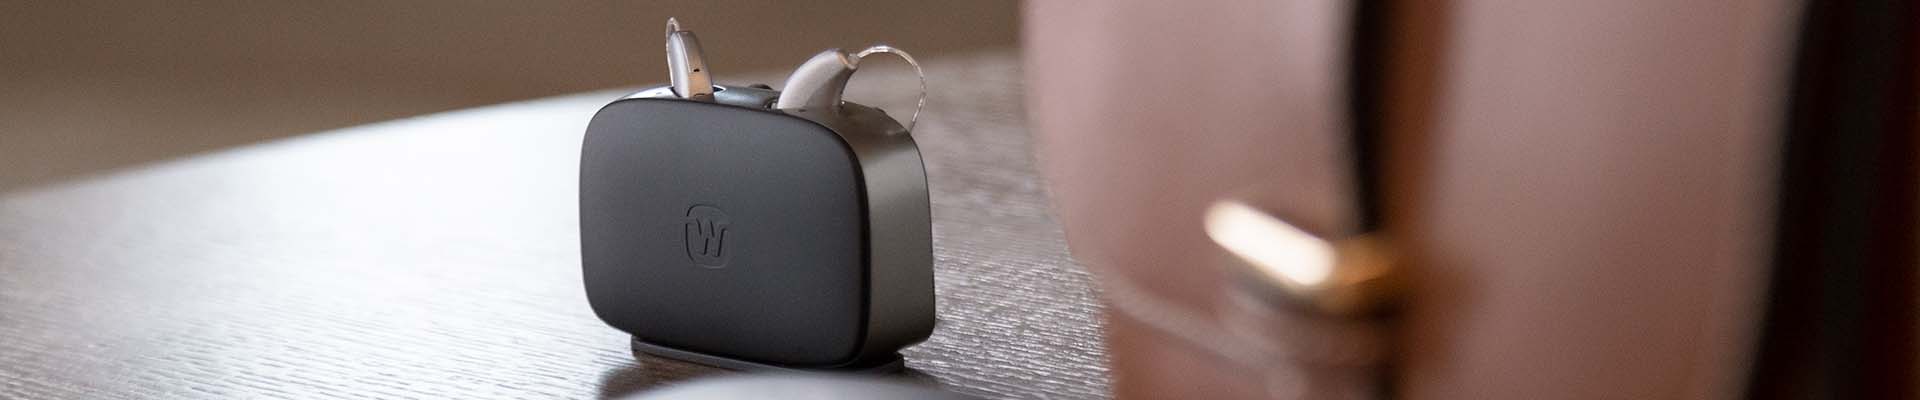 Widex Moment Sheer - sRIC hearing aids in charger